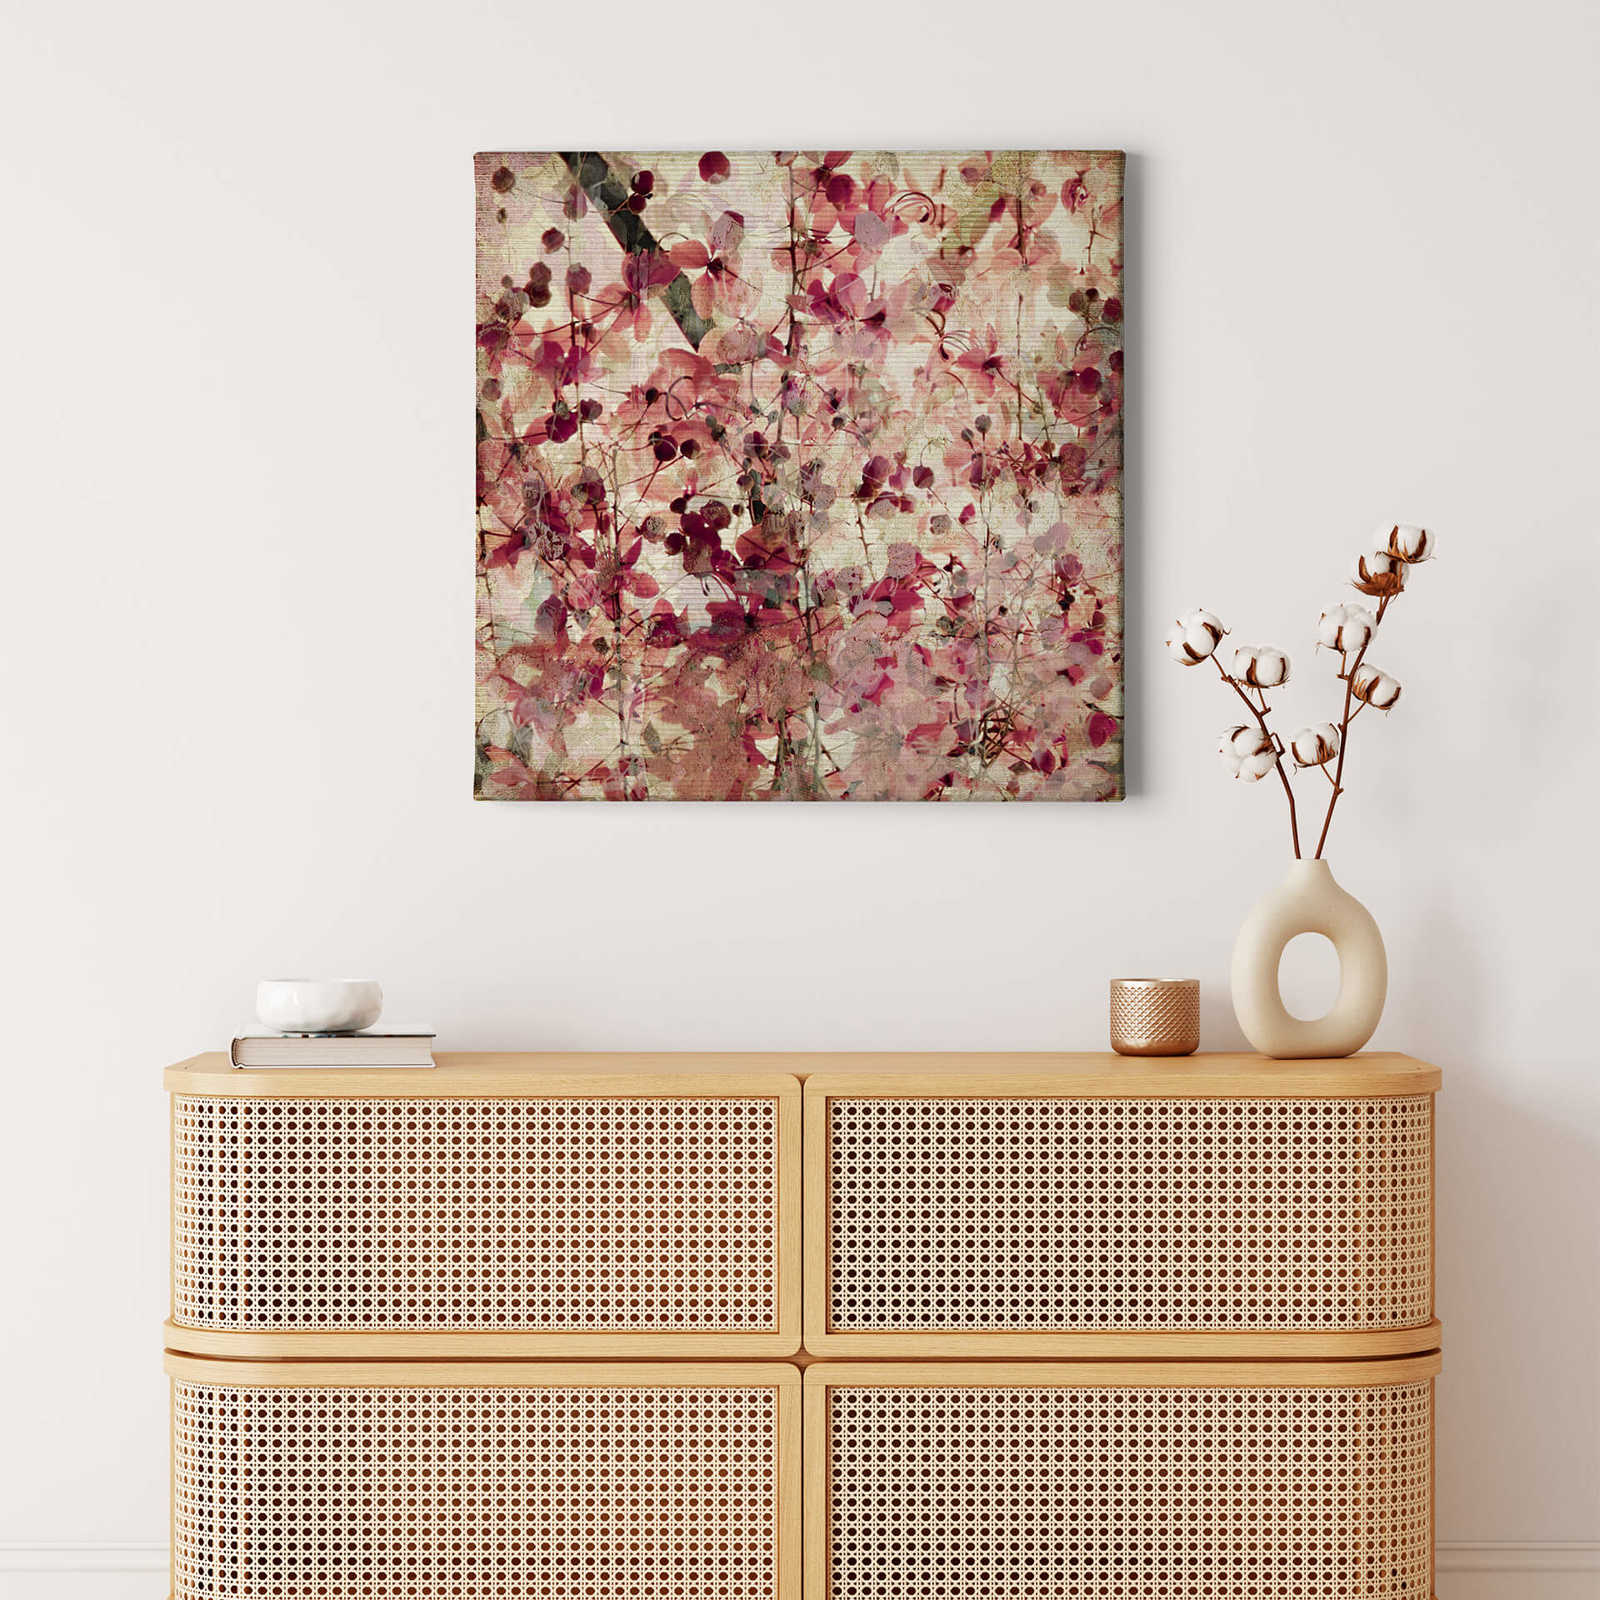             Square Canvas print Vintage with floral pattern – Pink, Red
        